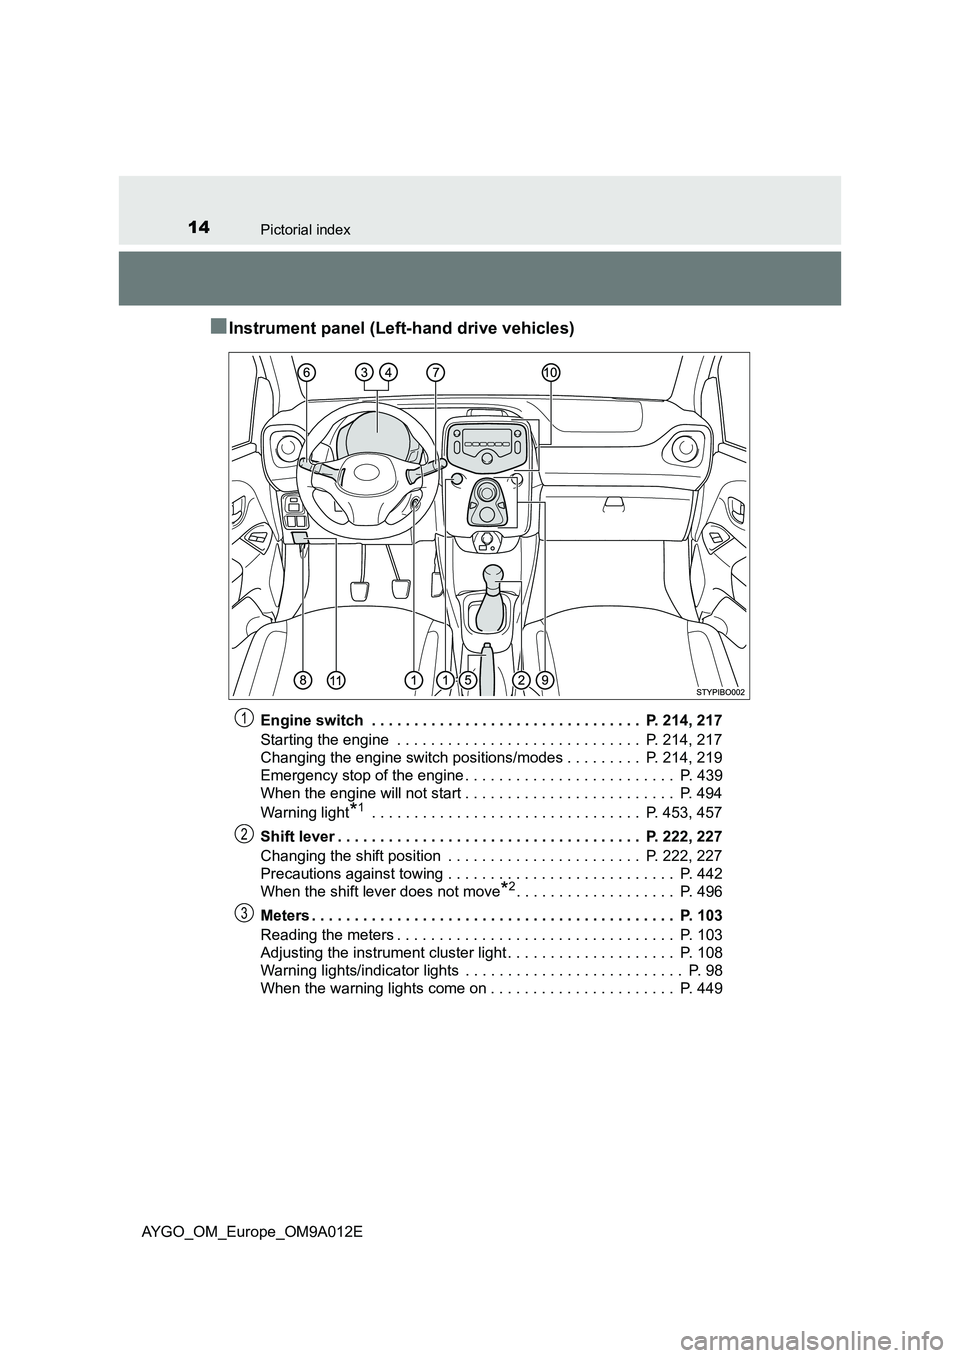 TOYOTA AYGO 2021  Owners Manual 14Pictorial index
AYGO_OM_Europe_OM9A012E
■Instrument panel (Left-hand drive vehicles)
Engine switch  . . . . . . . . . . . . . . . . . . . . . . . . . . . . . . . .  P. 214, 217
Starting the engine